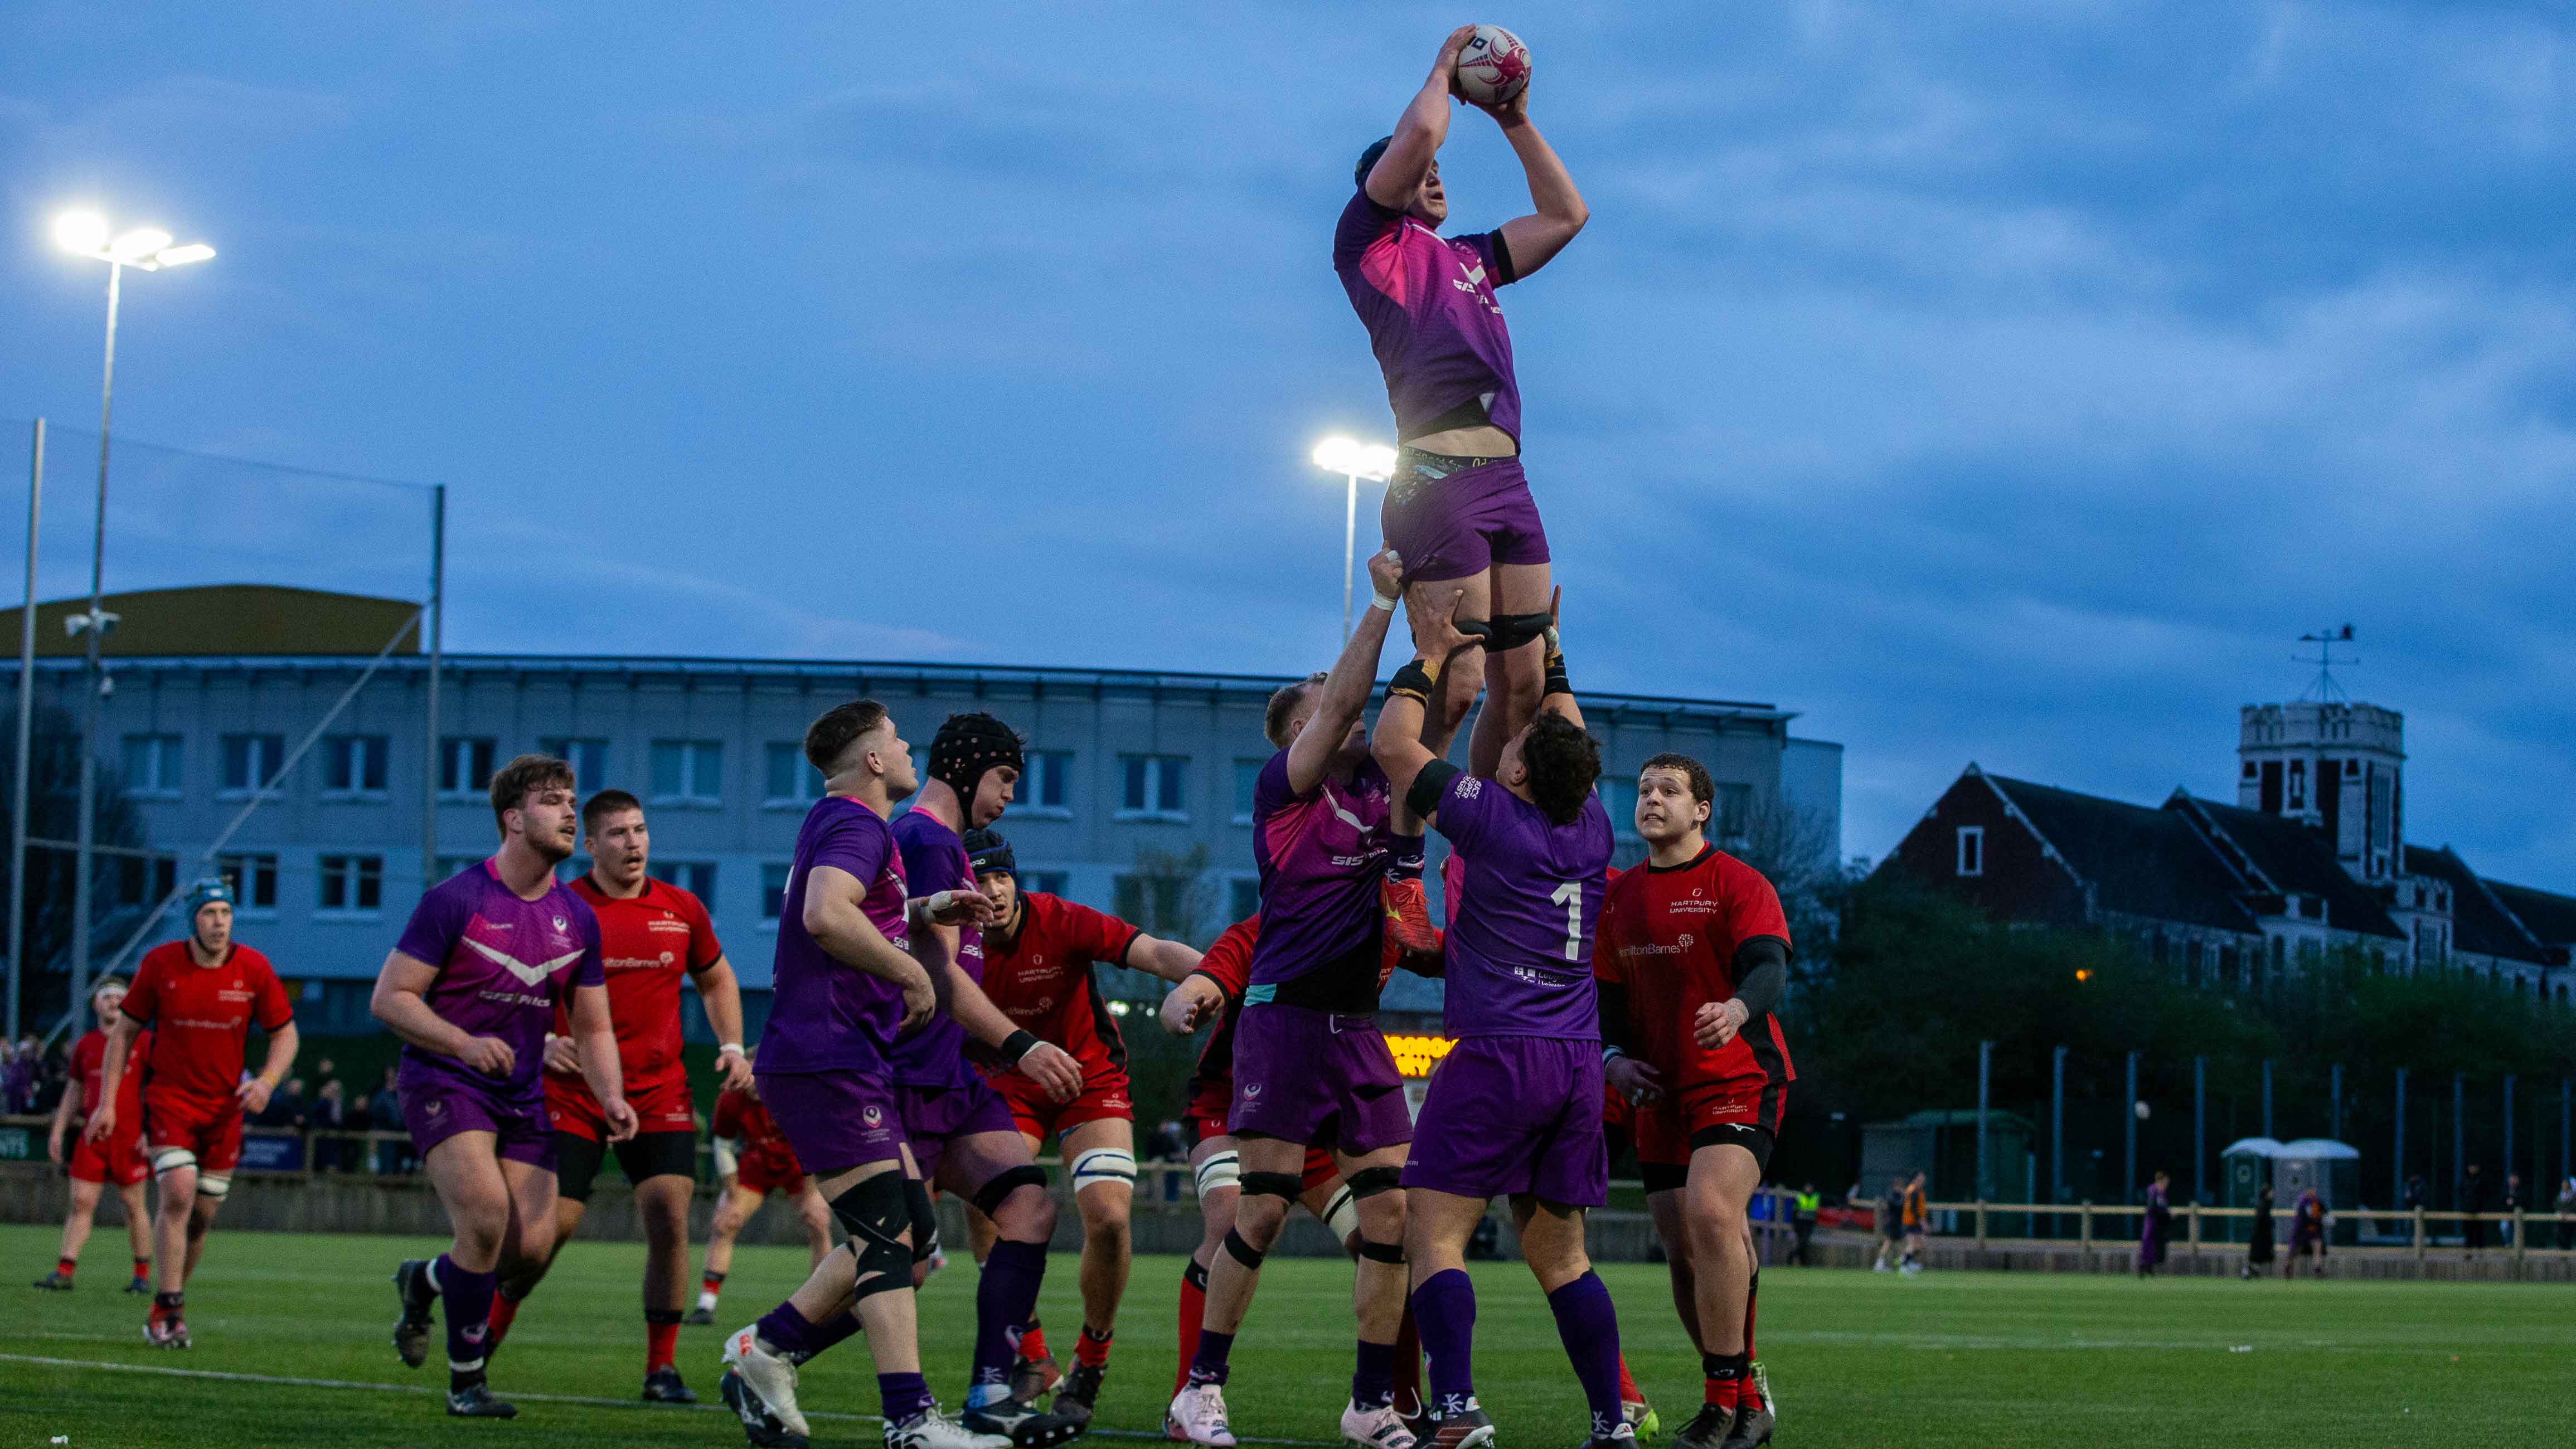 Loughborough Rugby team playing against Hartpury